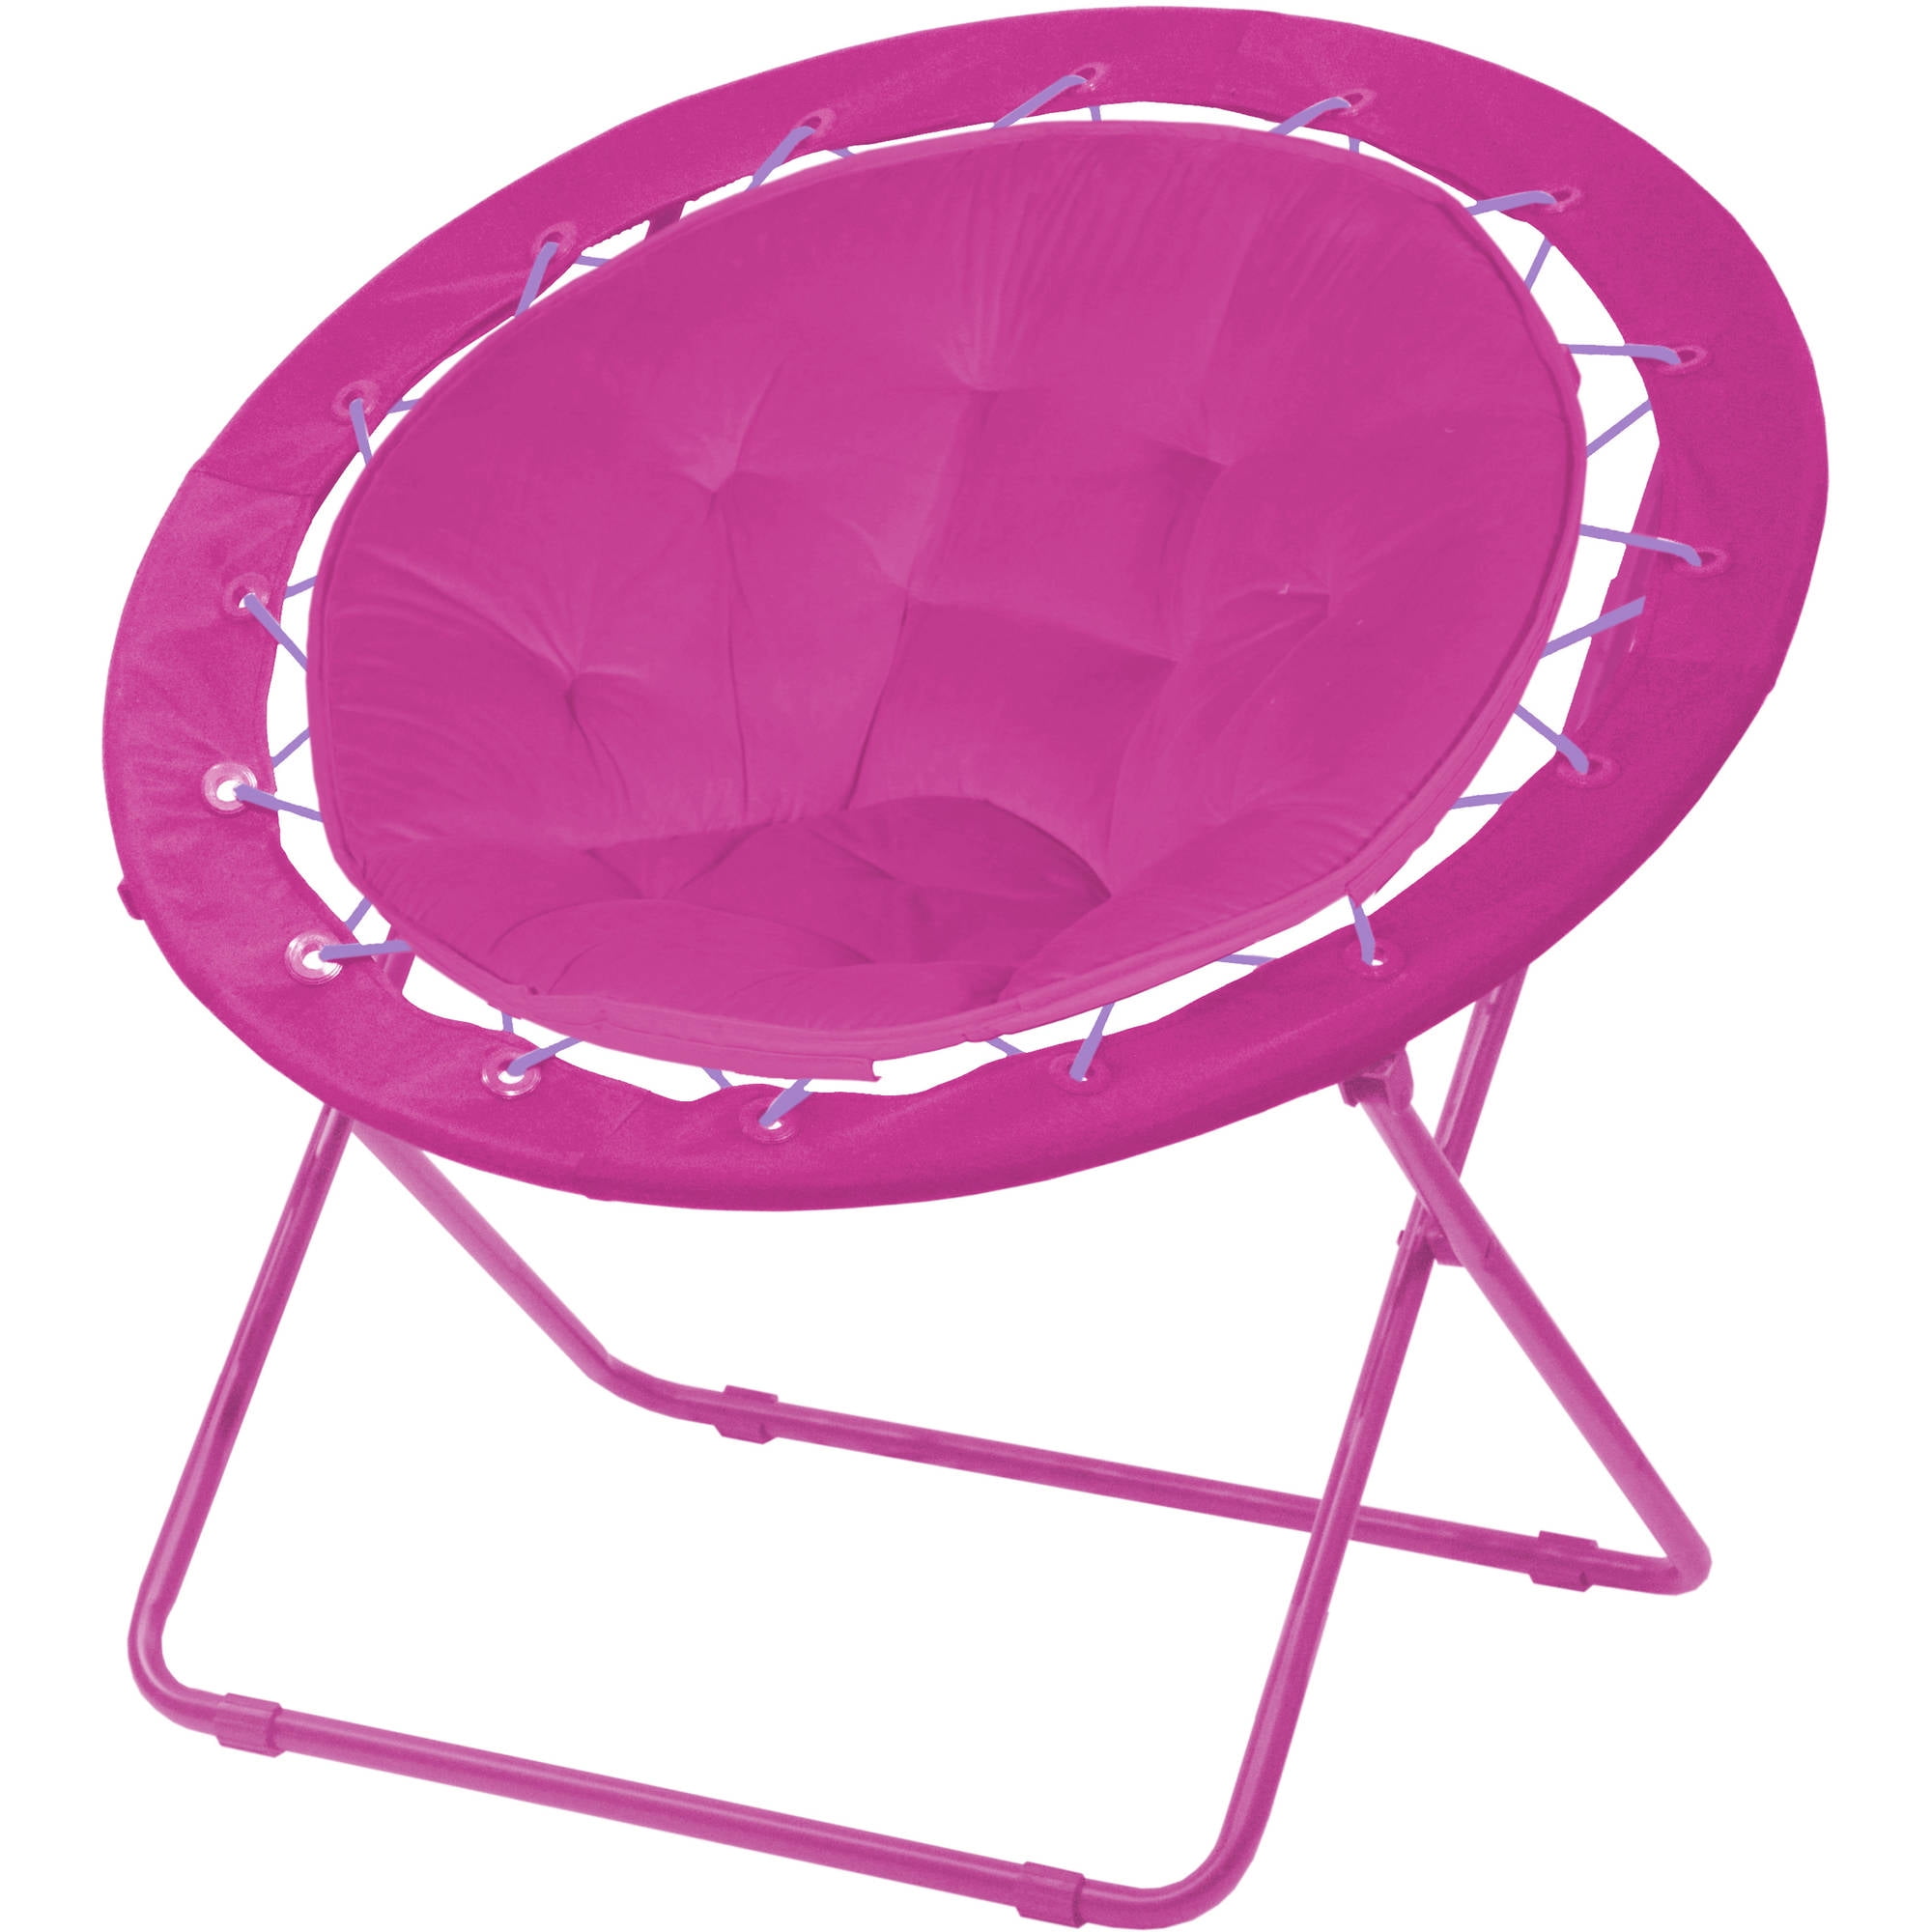 Urban Shop Adult Soft Web Chair Available In Multiple Colors